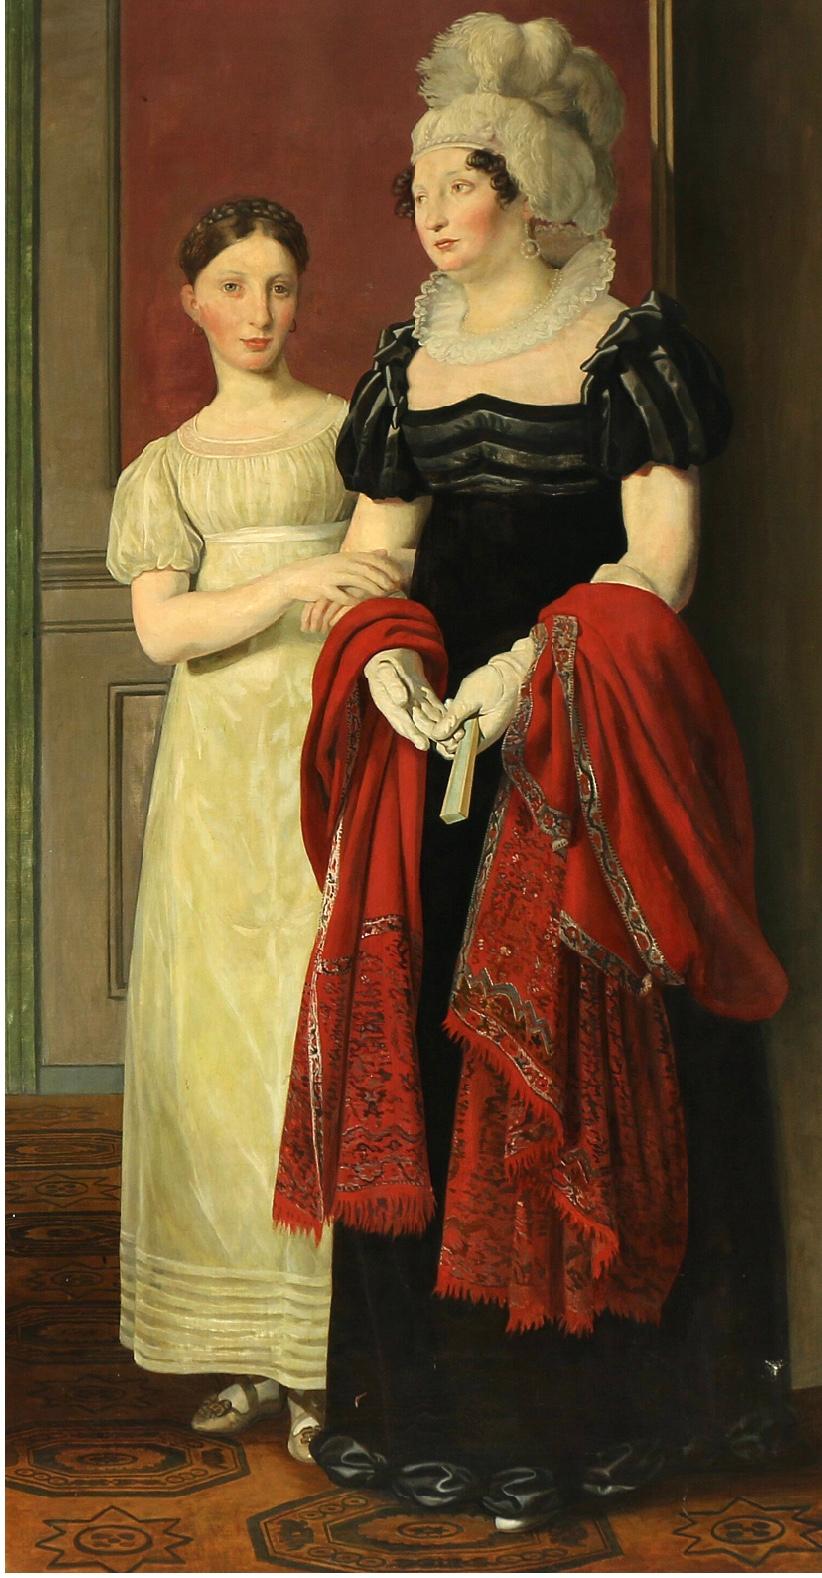 C. W. Eckersberg  Interior Painting - Mother and Daughter from Nathanson Family by C. W. Eckersberg, museum copy 19th.